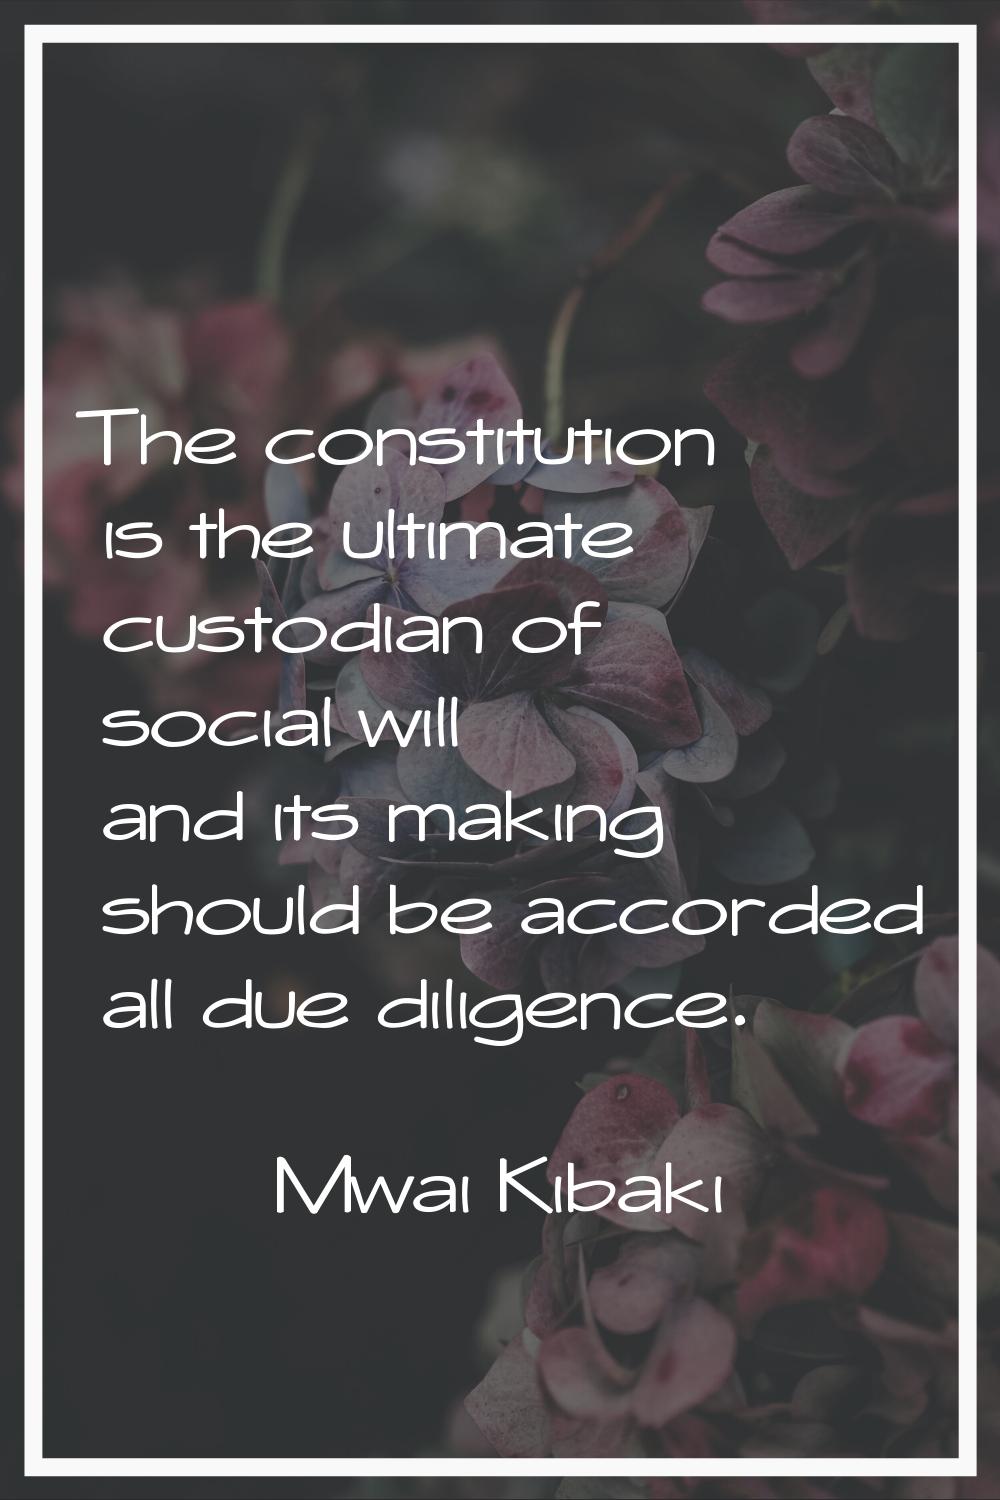 The constitution is the ultimate custodian of social will and its making should be accorded all due